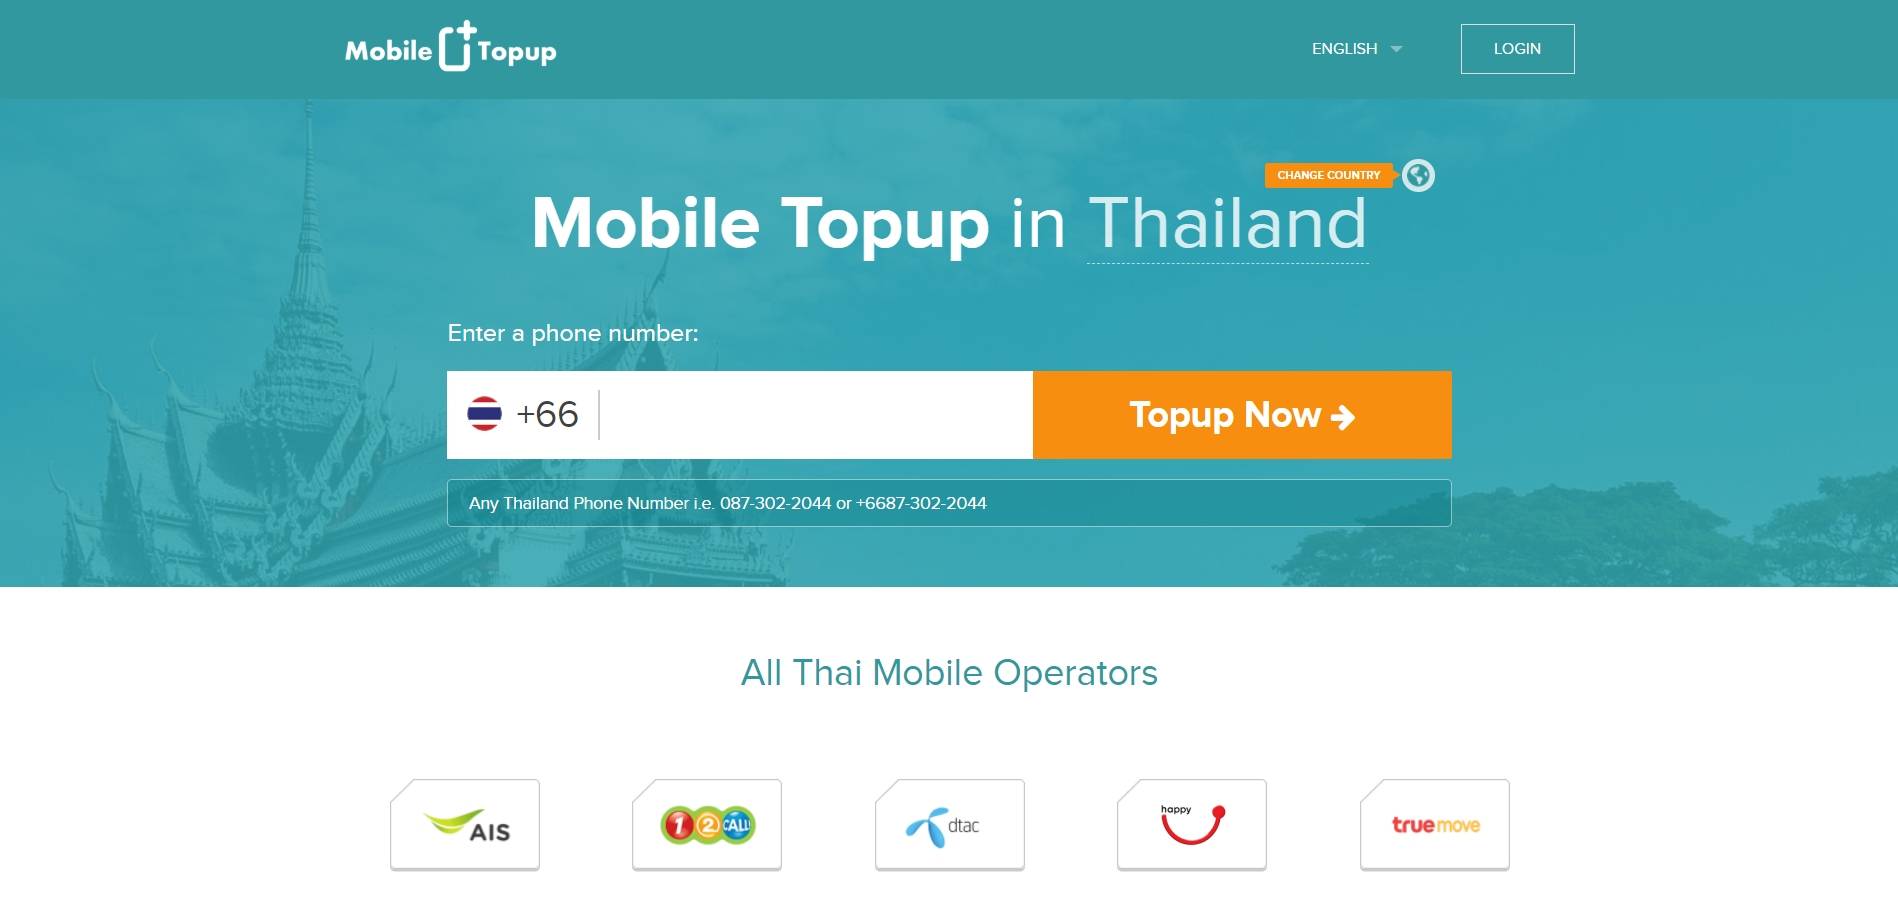 Mobile Topup